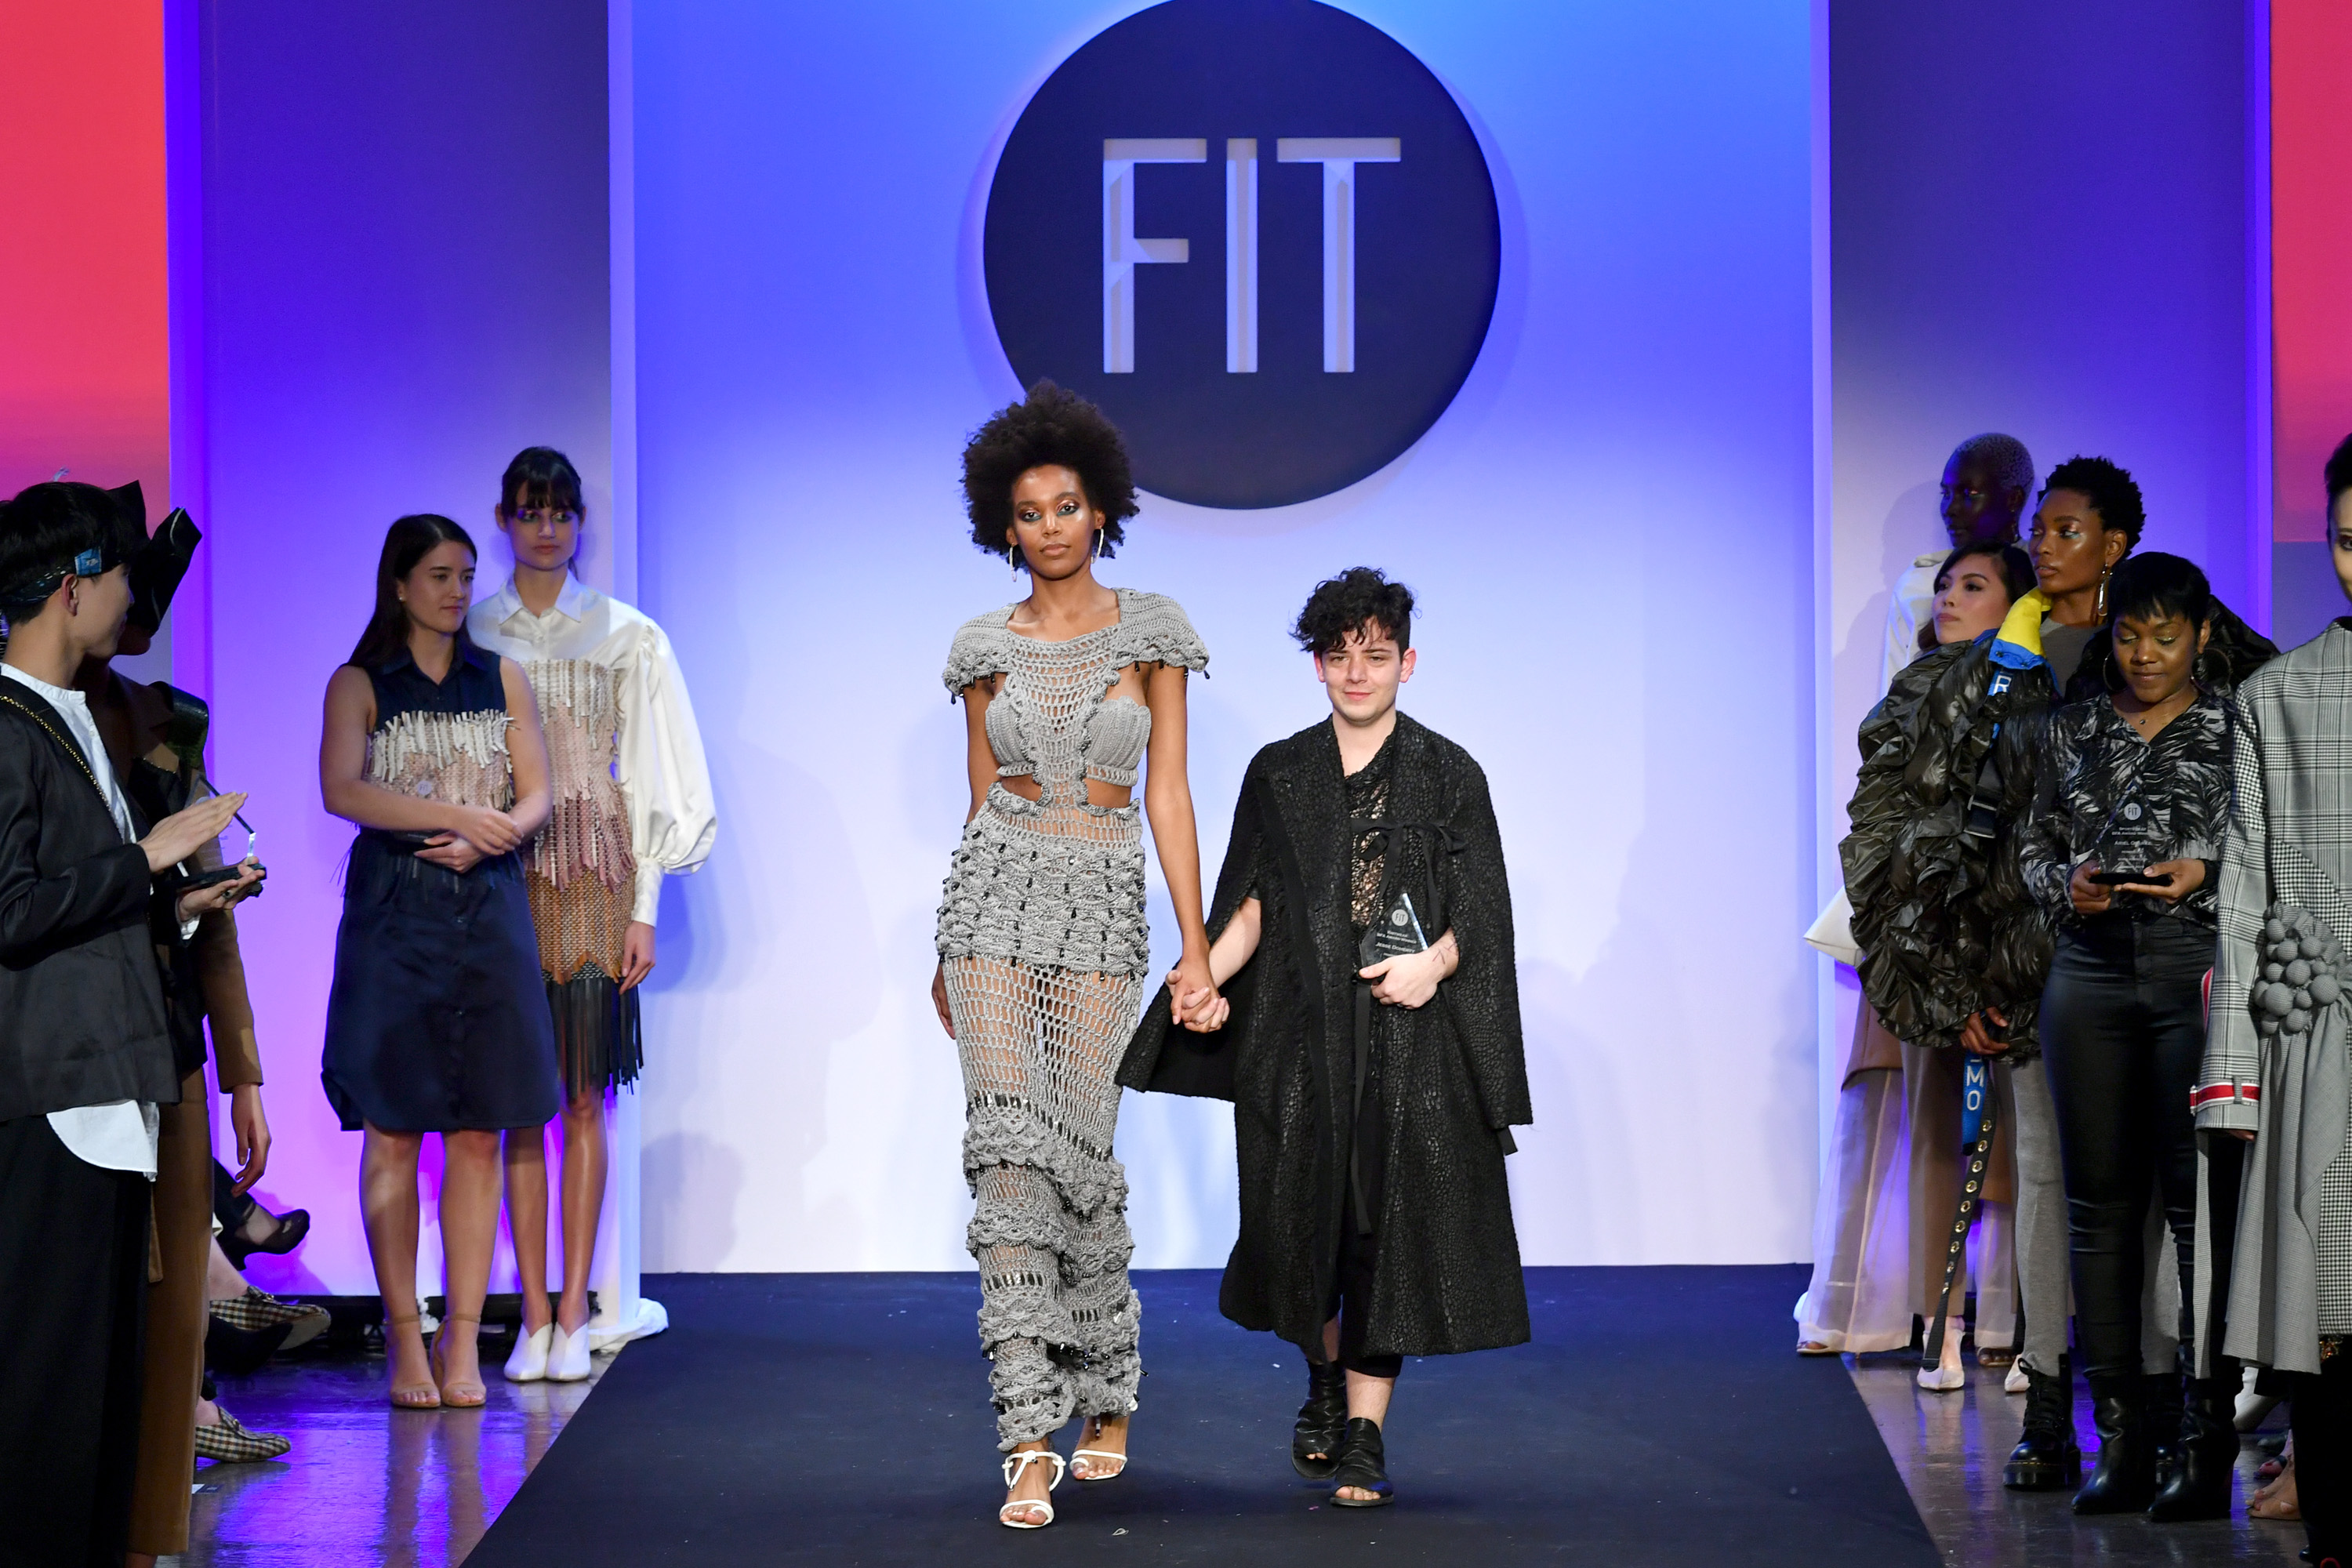 2019 Future Of Fashion Runway Show At The Fashion Institute Of Technology